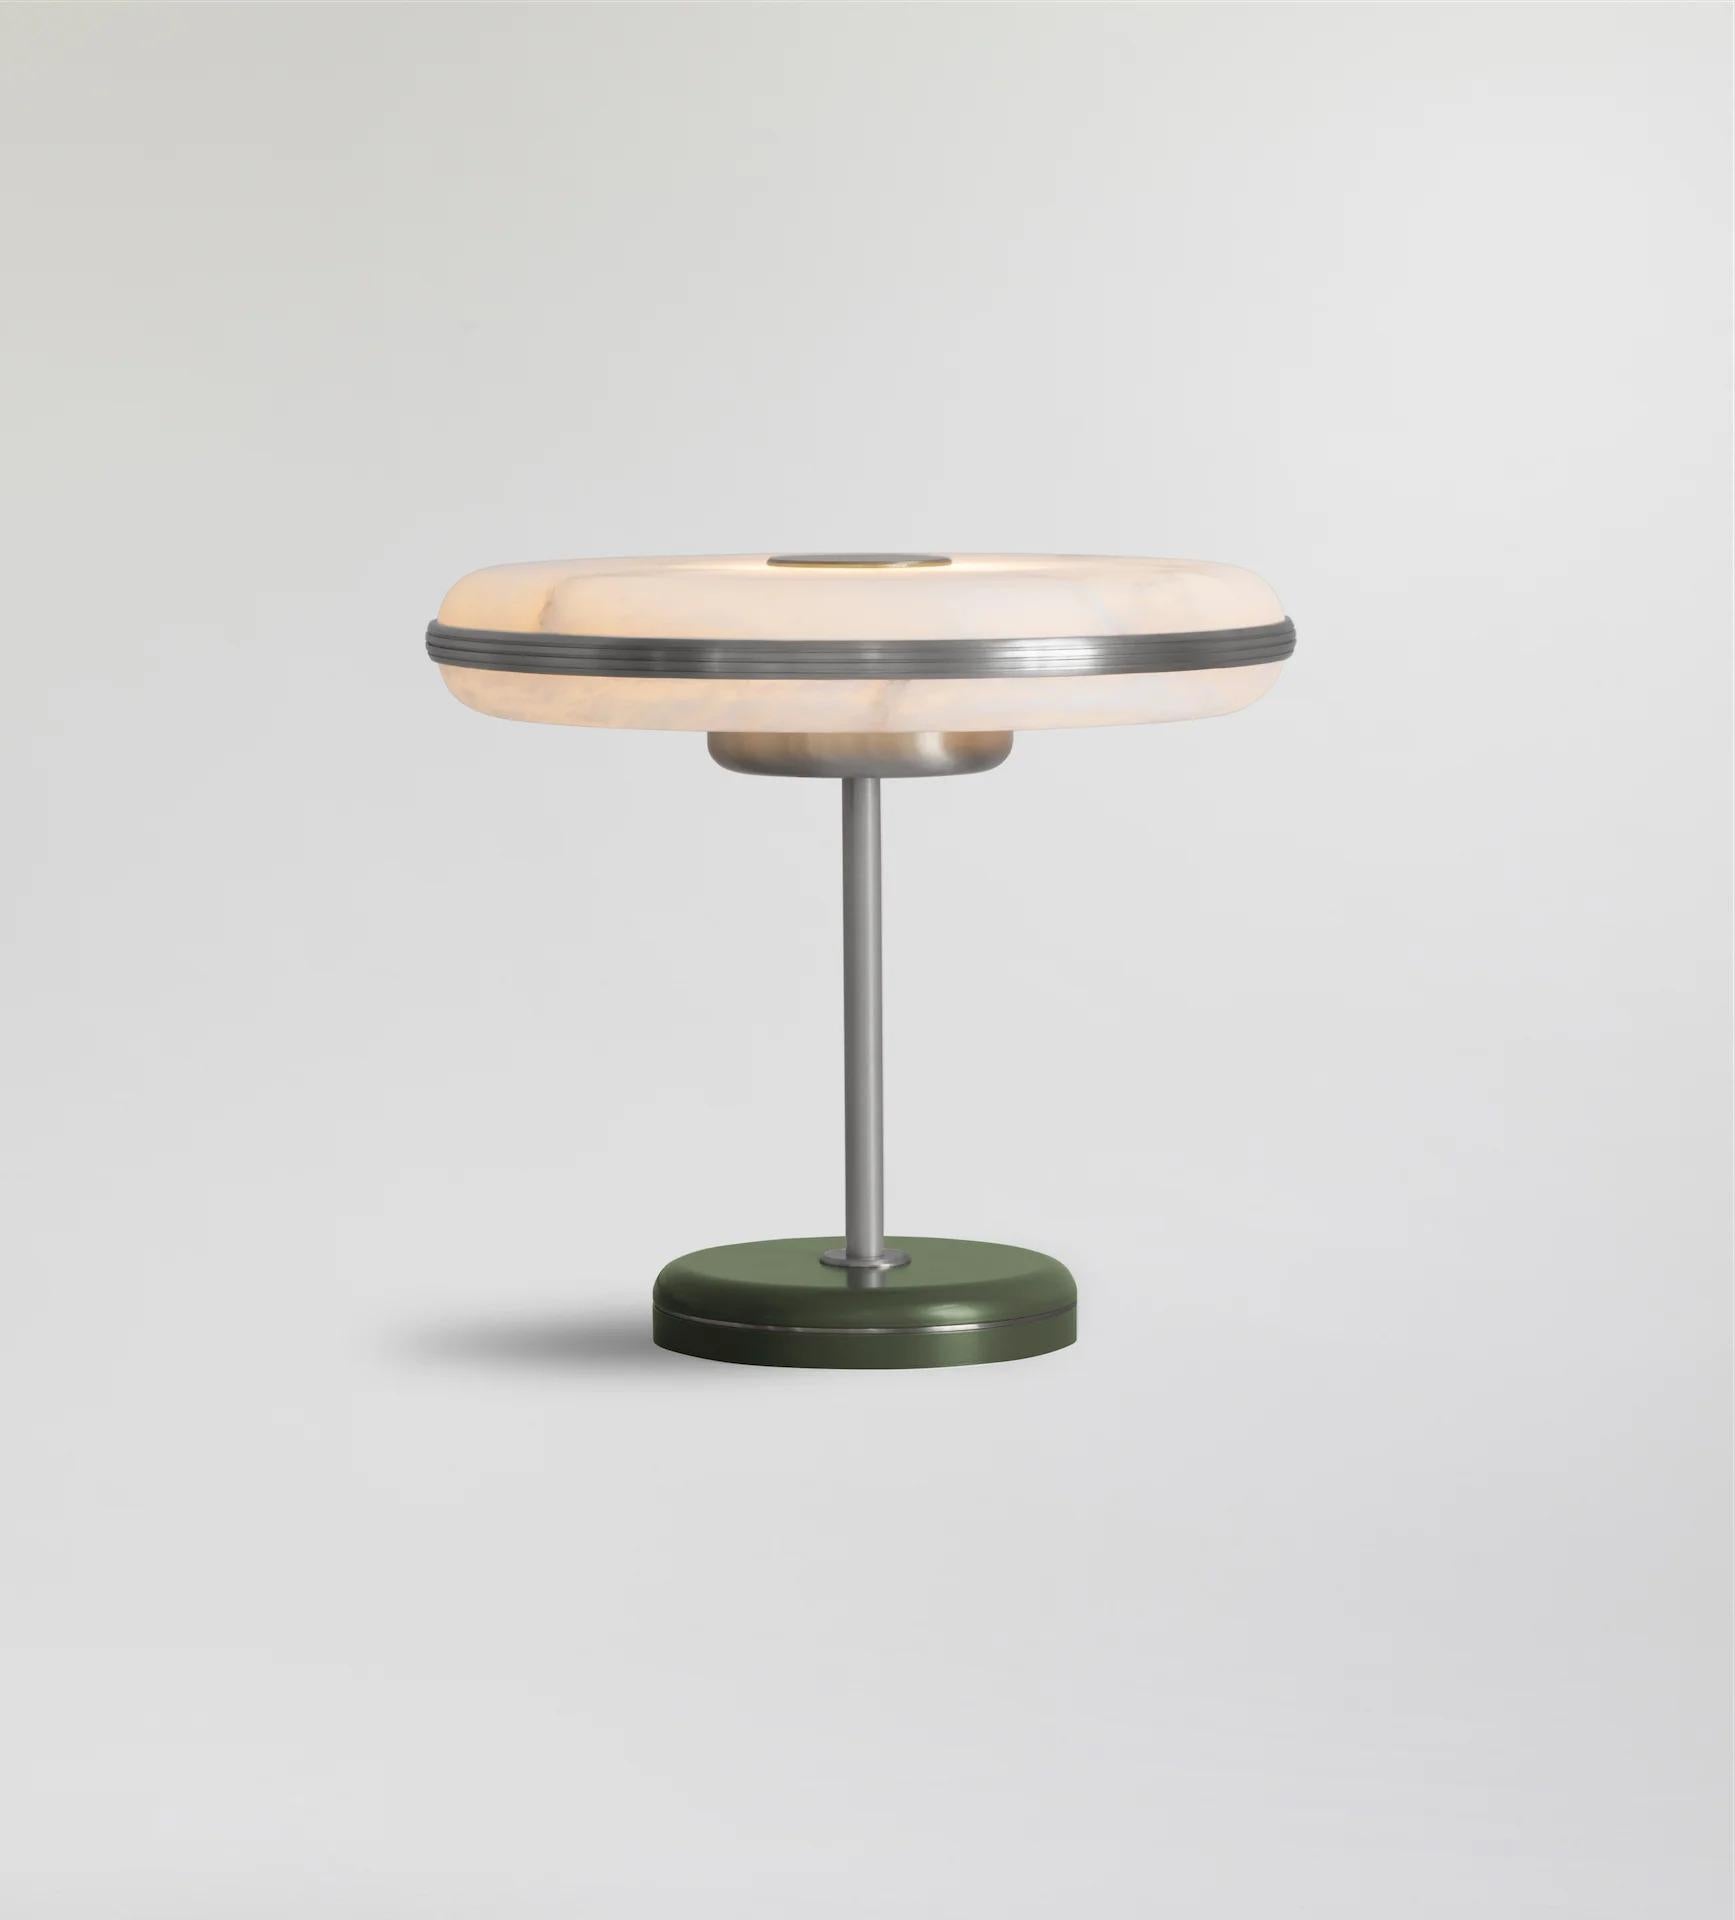 Beran Satin Nickel Large Table Lamp by Bert Frank
Dimensions: Ø 36 x H 32 cm.
Materials: Satin nickel and alabaster.
Base finish: Olive.

Available in two different sizes. Available in different finishes and materials. Please contact us. 

The